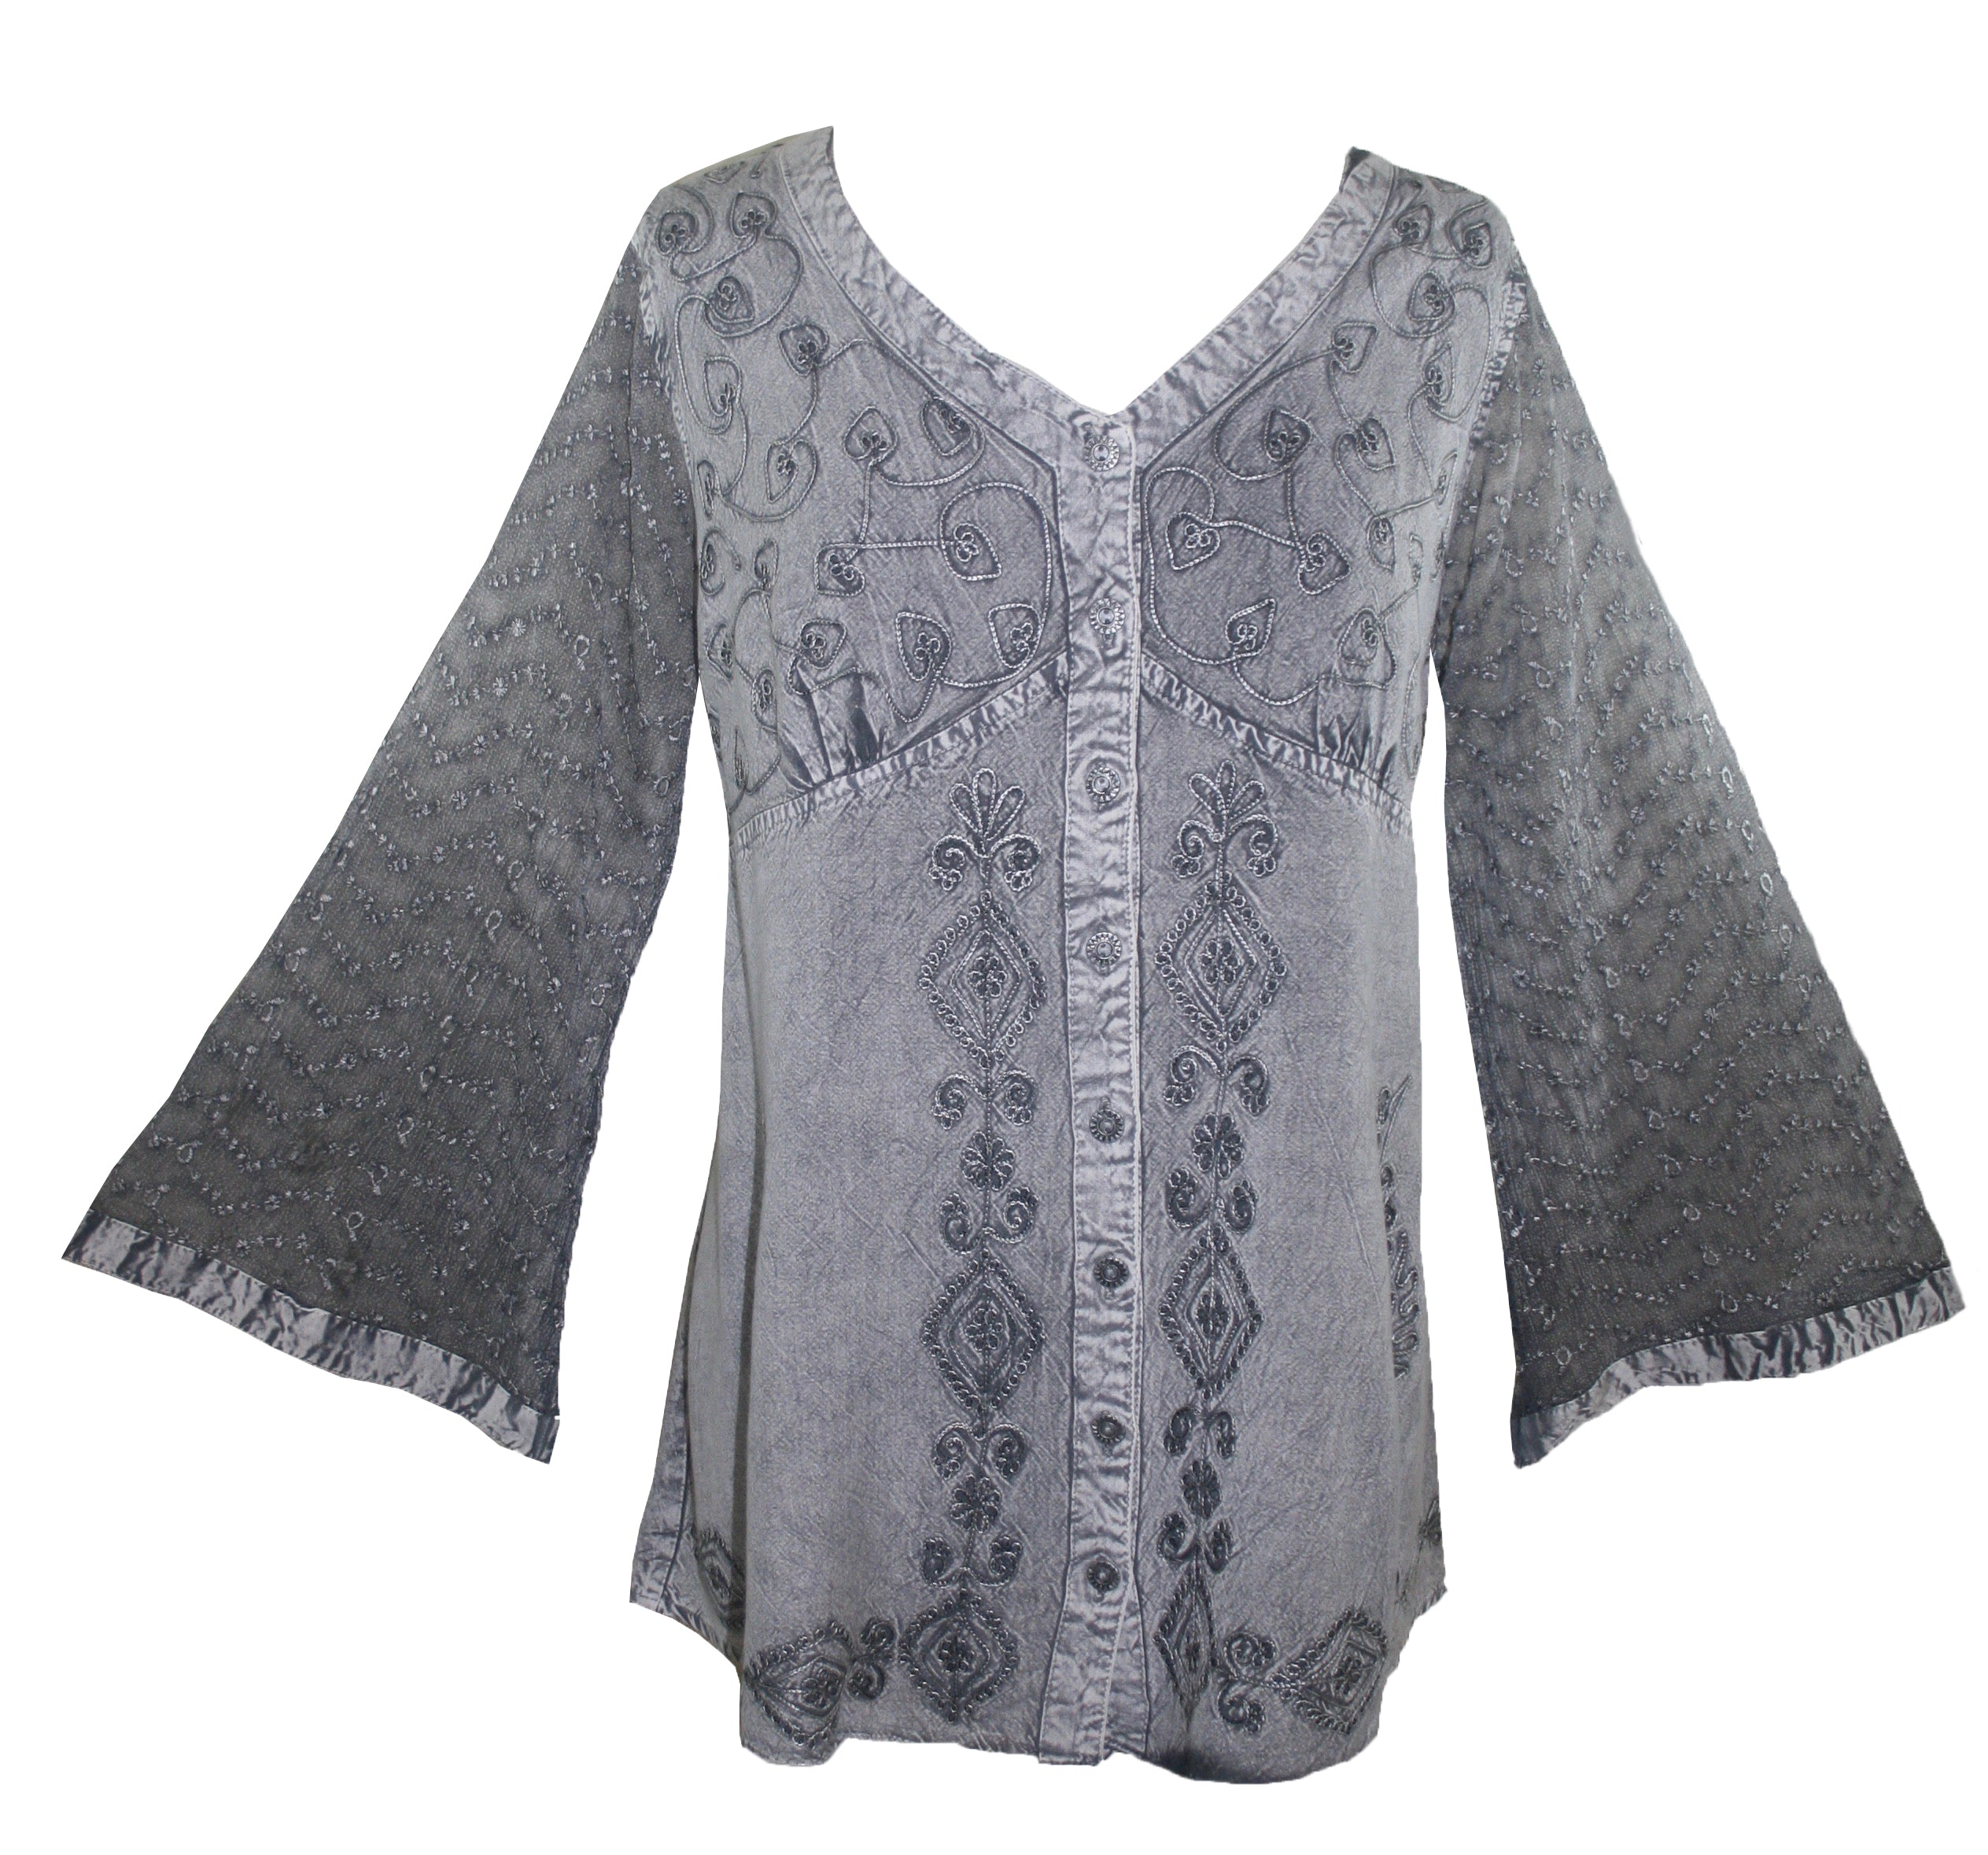 151 B Medieval Victorian Gothic embroidered button down sheer lace sle ...